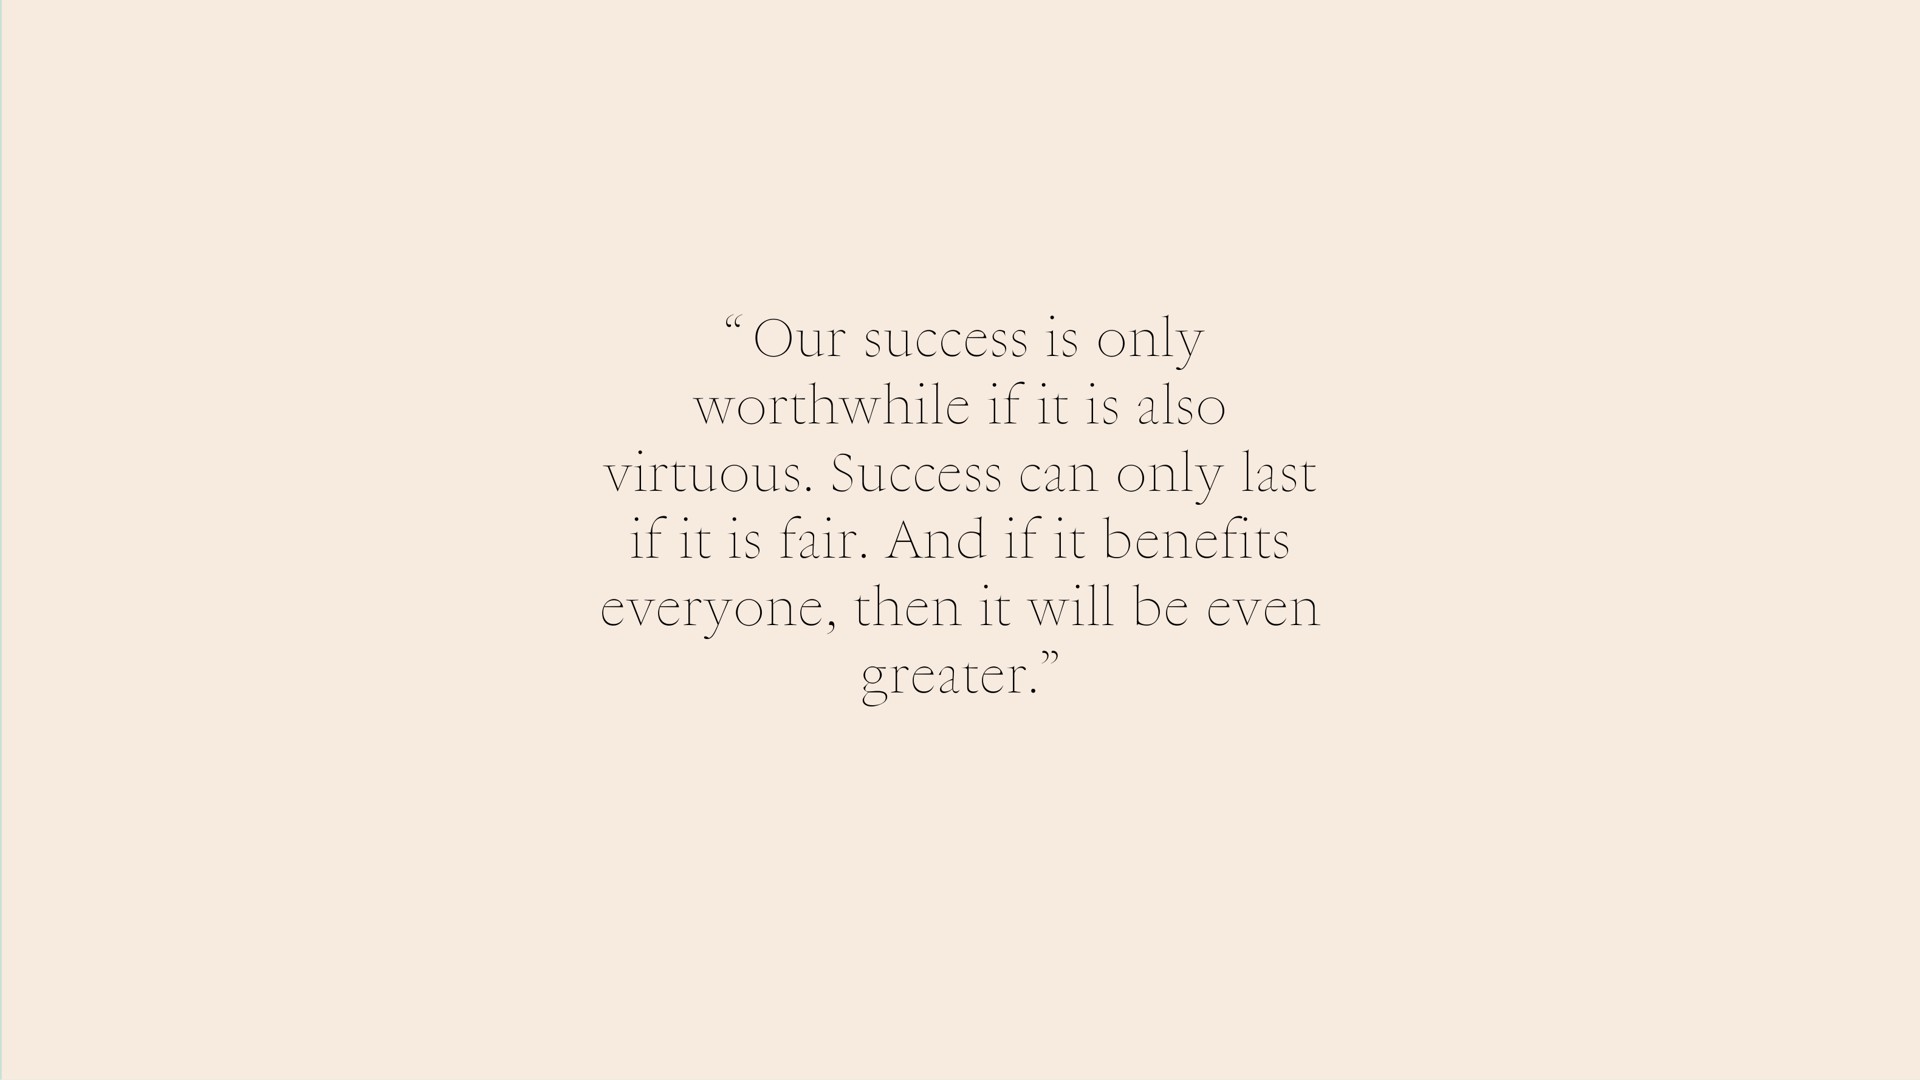 our success is only if it is also virtuous success can only last if it is fair and if it benefits everyone then it will be even greater | LVMH